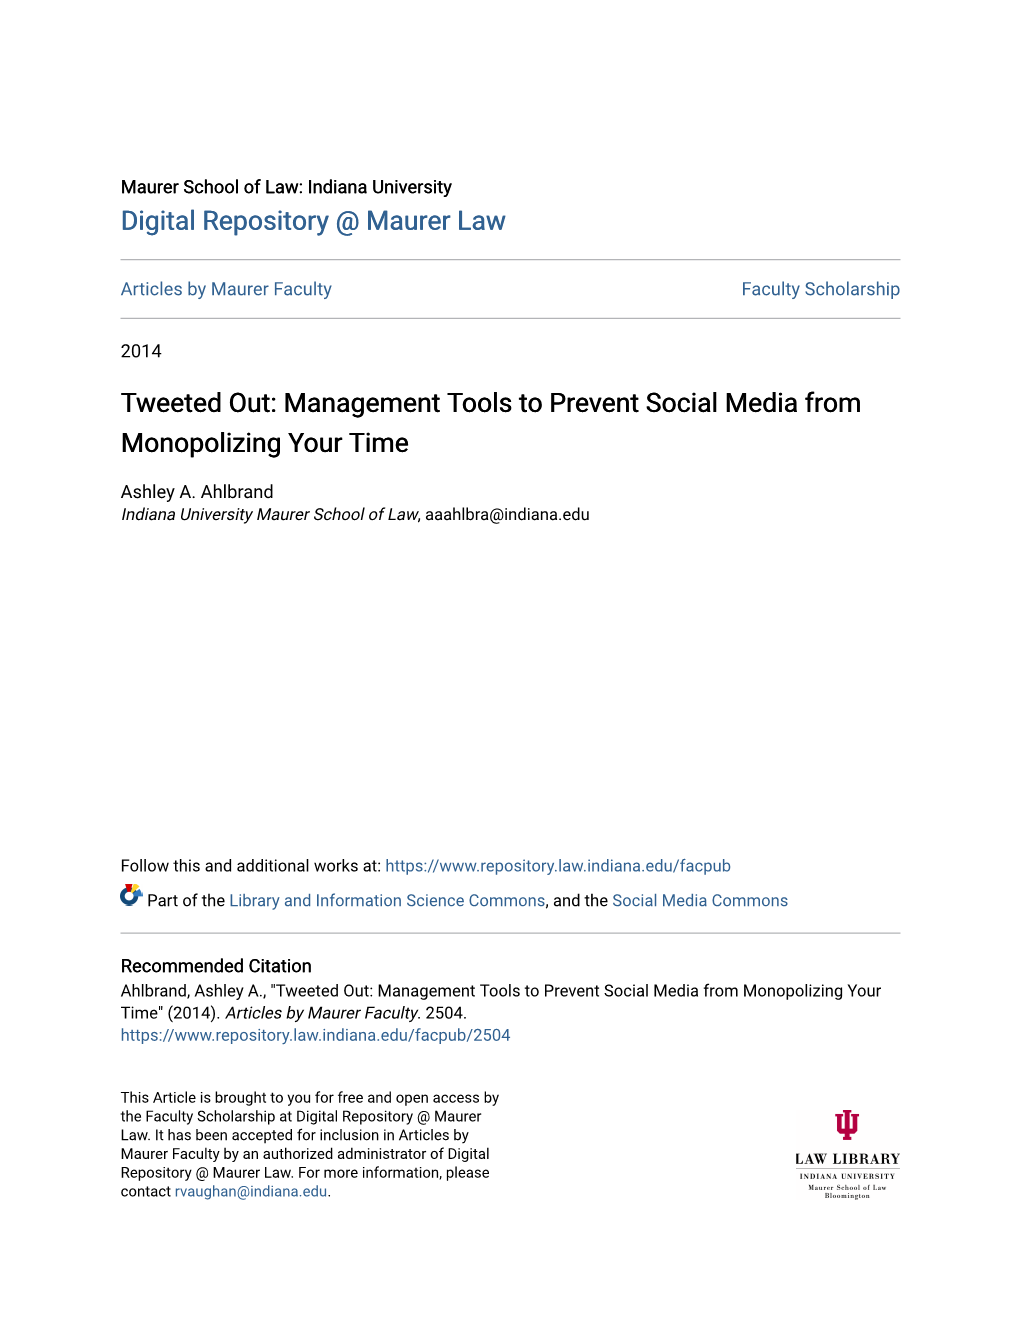 Tweeted Out: Management Tools to Prevent Social Media from Monopolizing Your Time